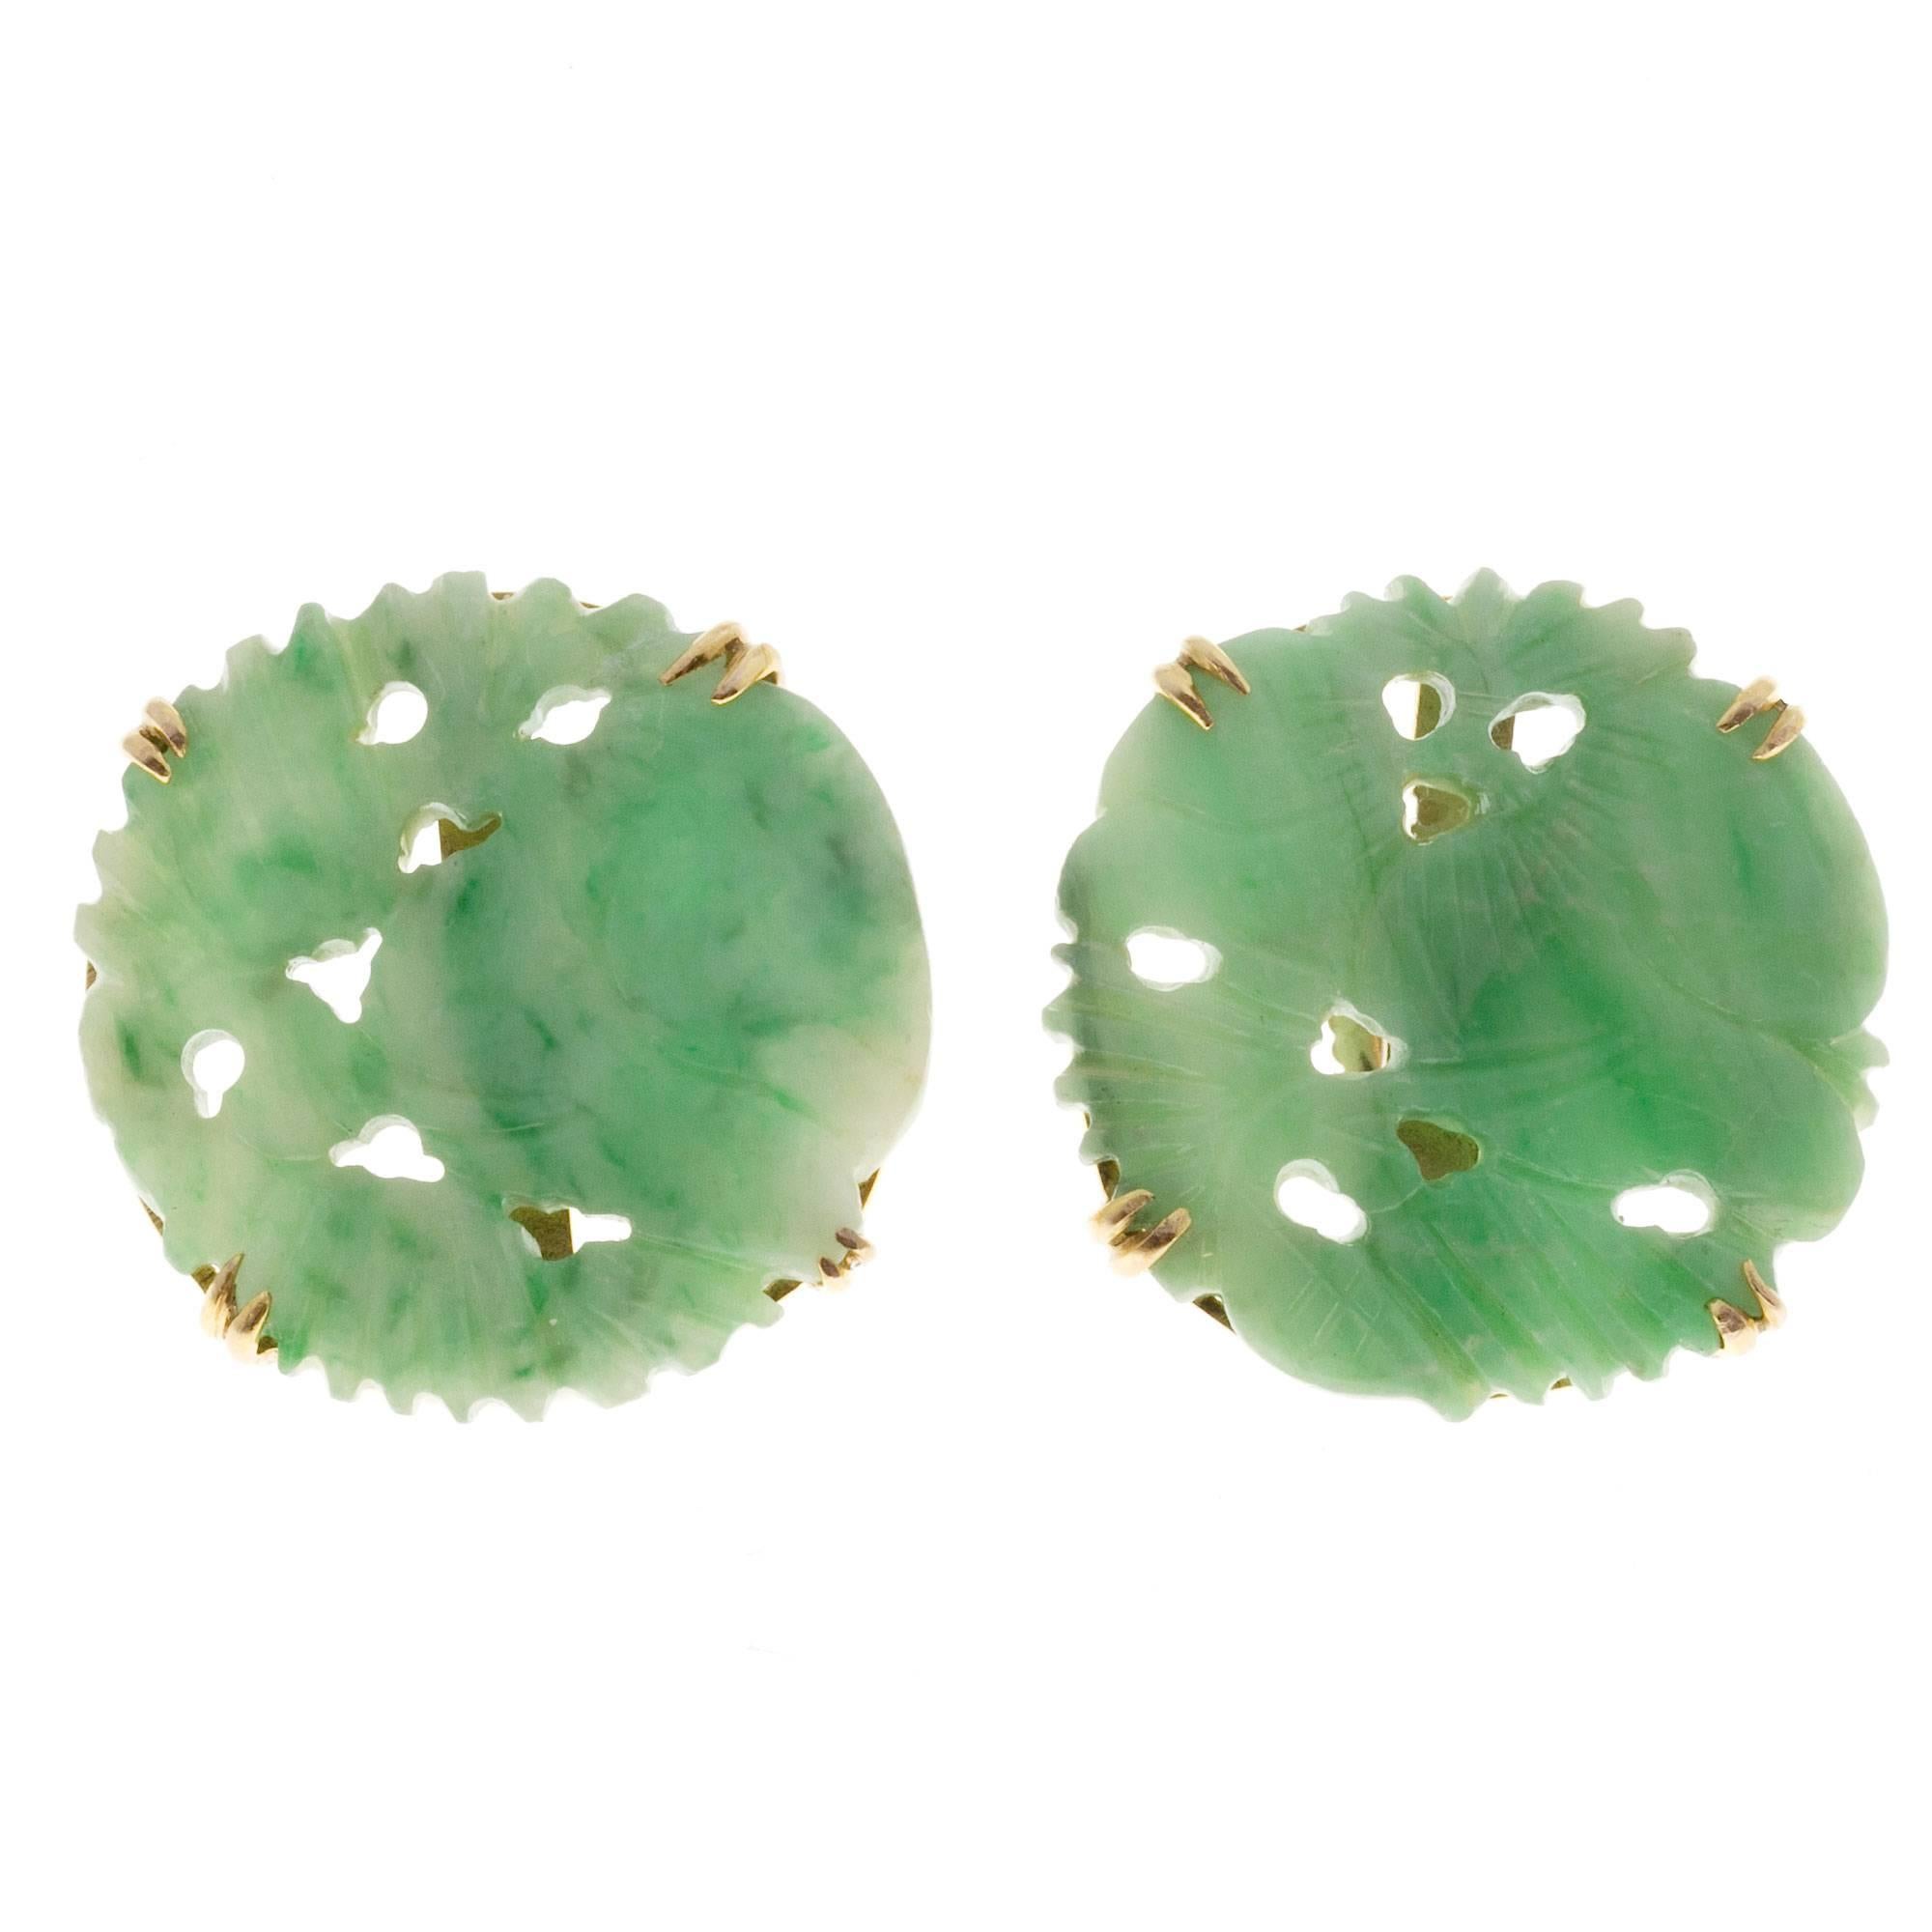 Natural Jadeite Jade Carved Round Tablets Gold Earrings In Good Condition For Sale In Stamford, CT